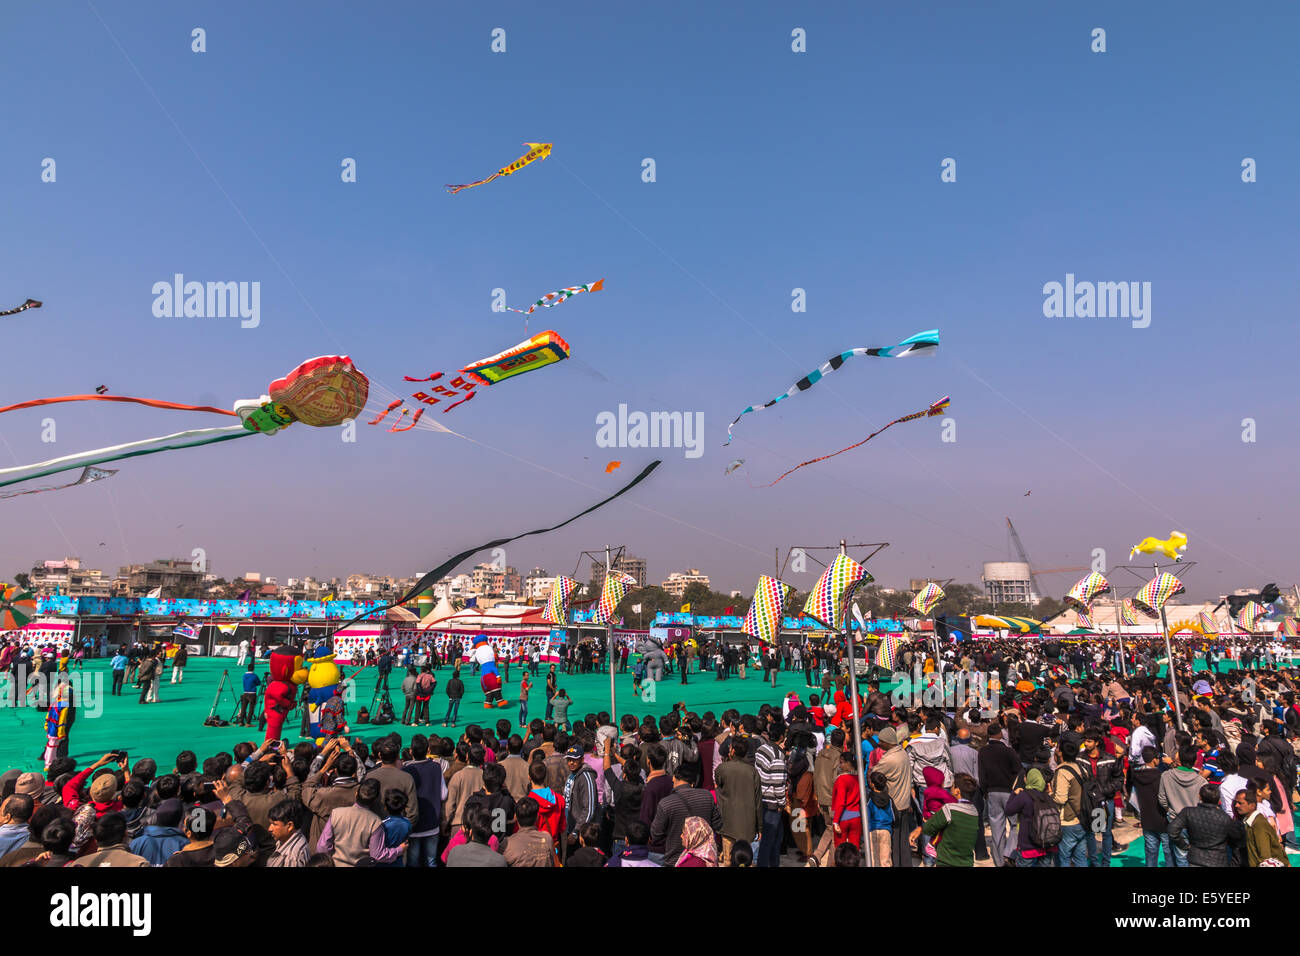 Uttarayan Unique and famous kite flying festival of Gujarat, India